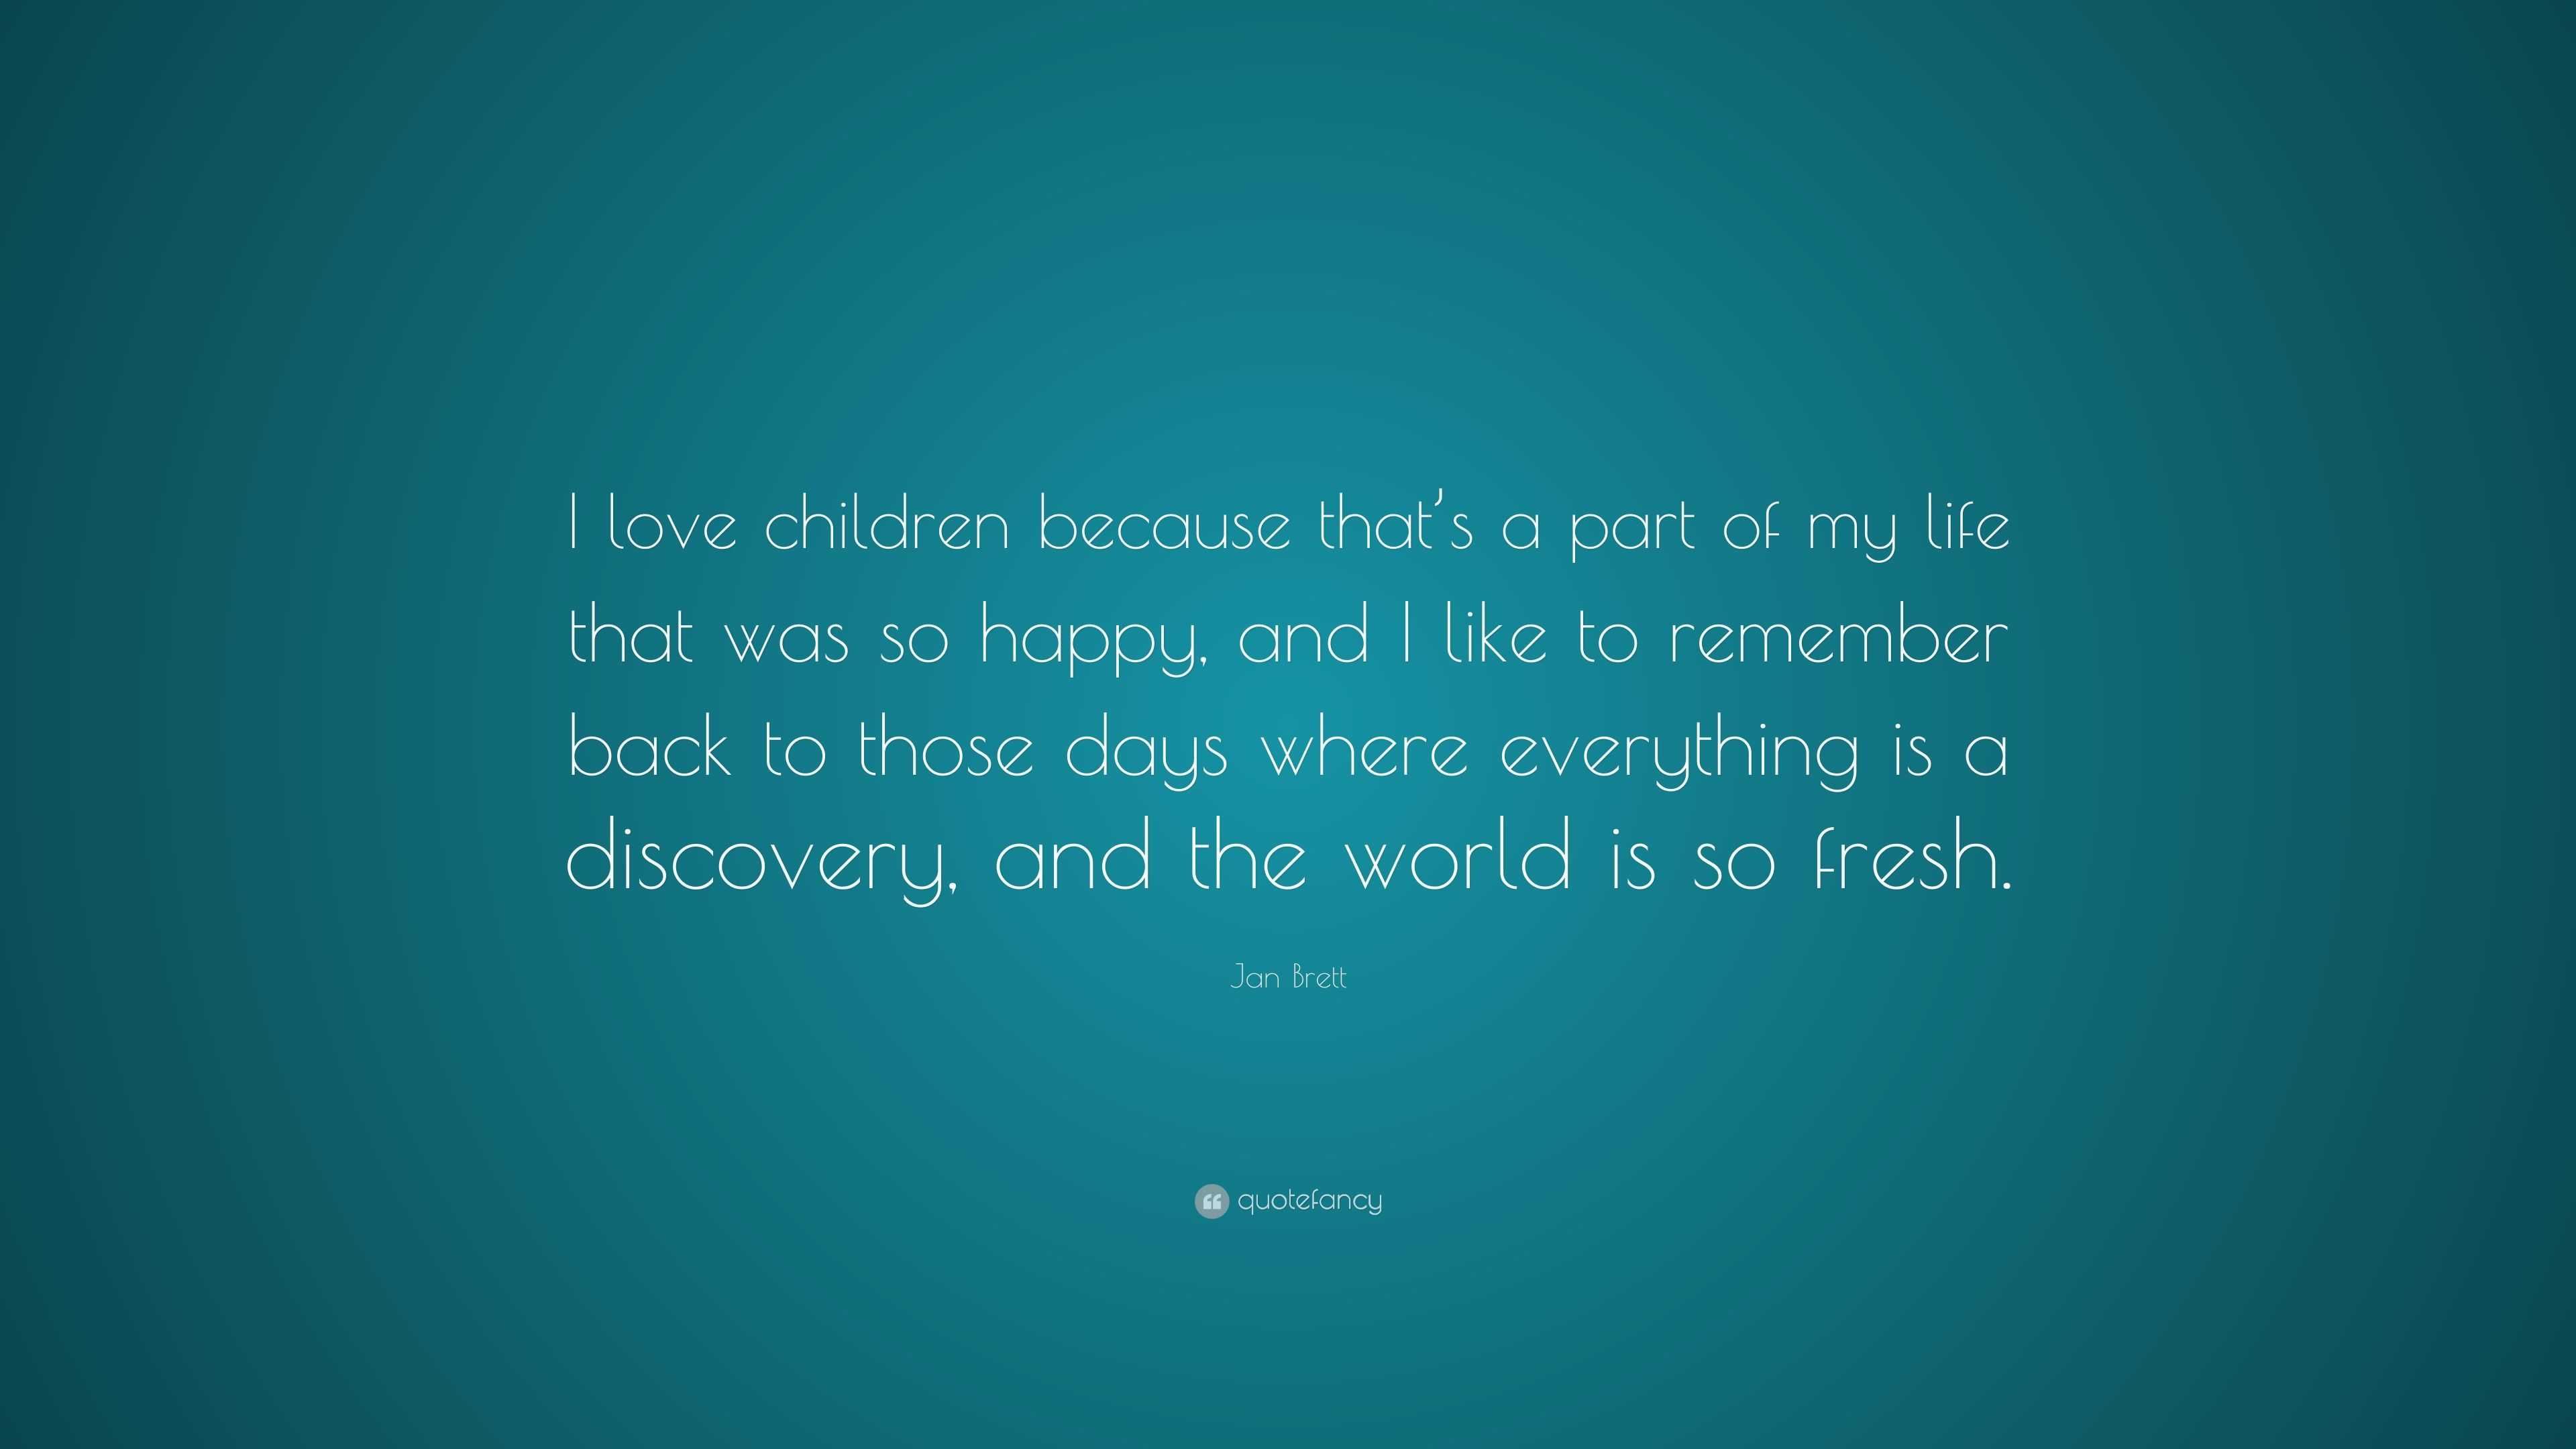 Jan Brett Quote “I love children because that s a part of my life that